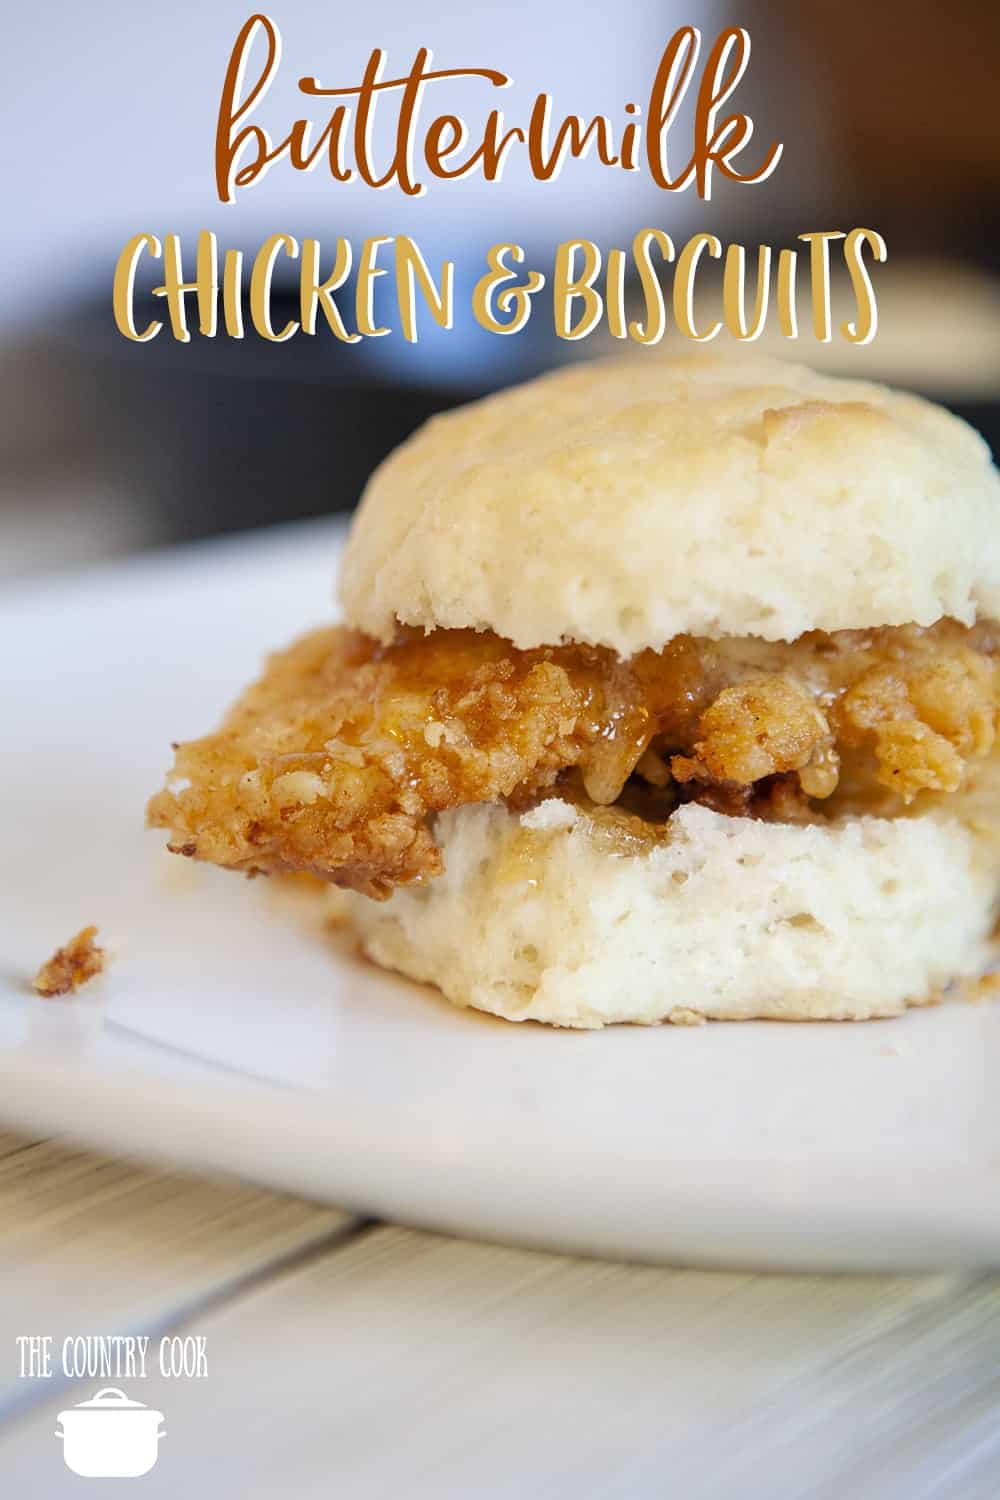 Buttermilk Chicken Biscuits recipe from The Country Cook